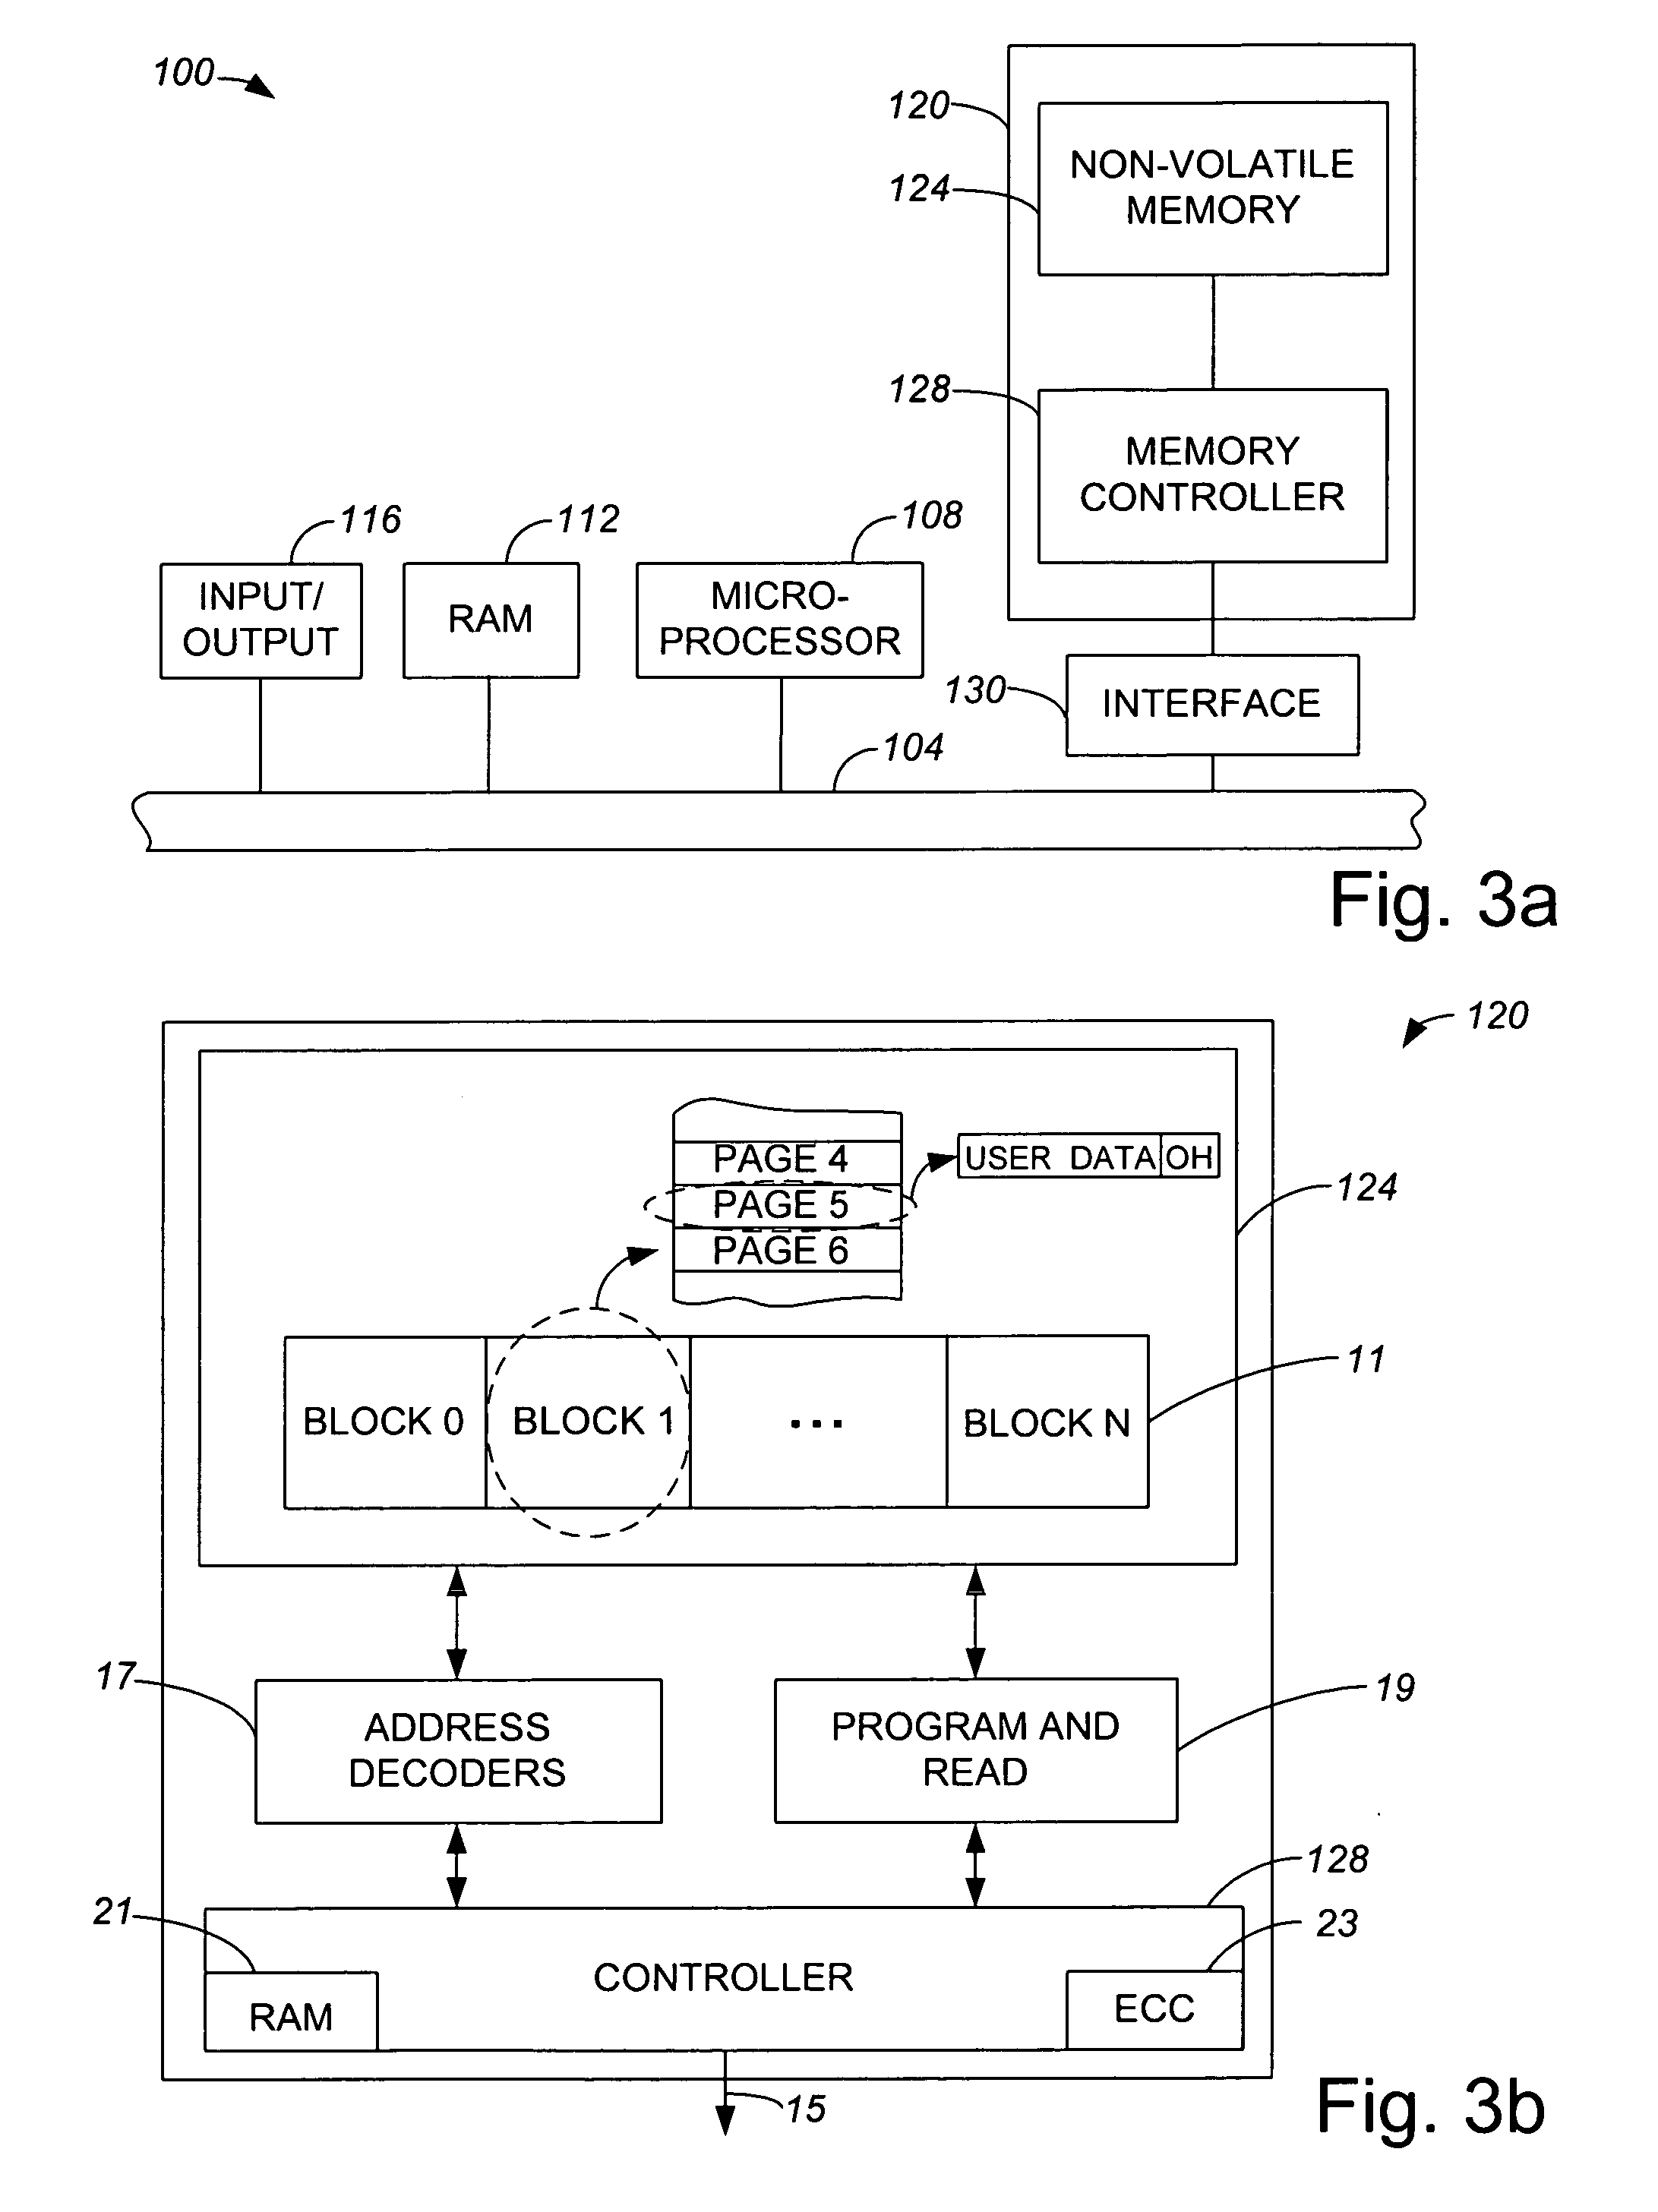 Method and apparatus for managing the integrity of data in non-volatile memory system